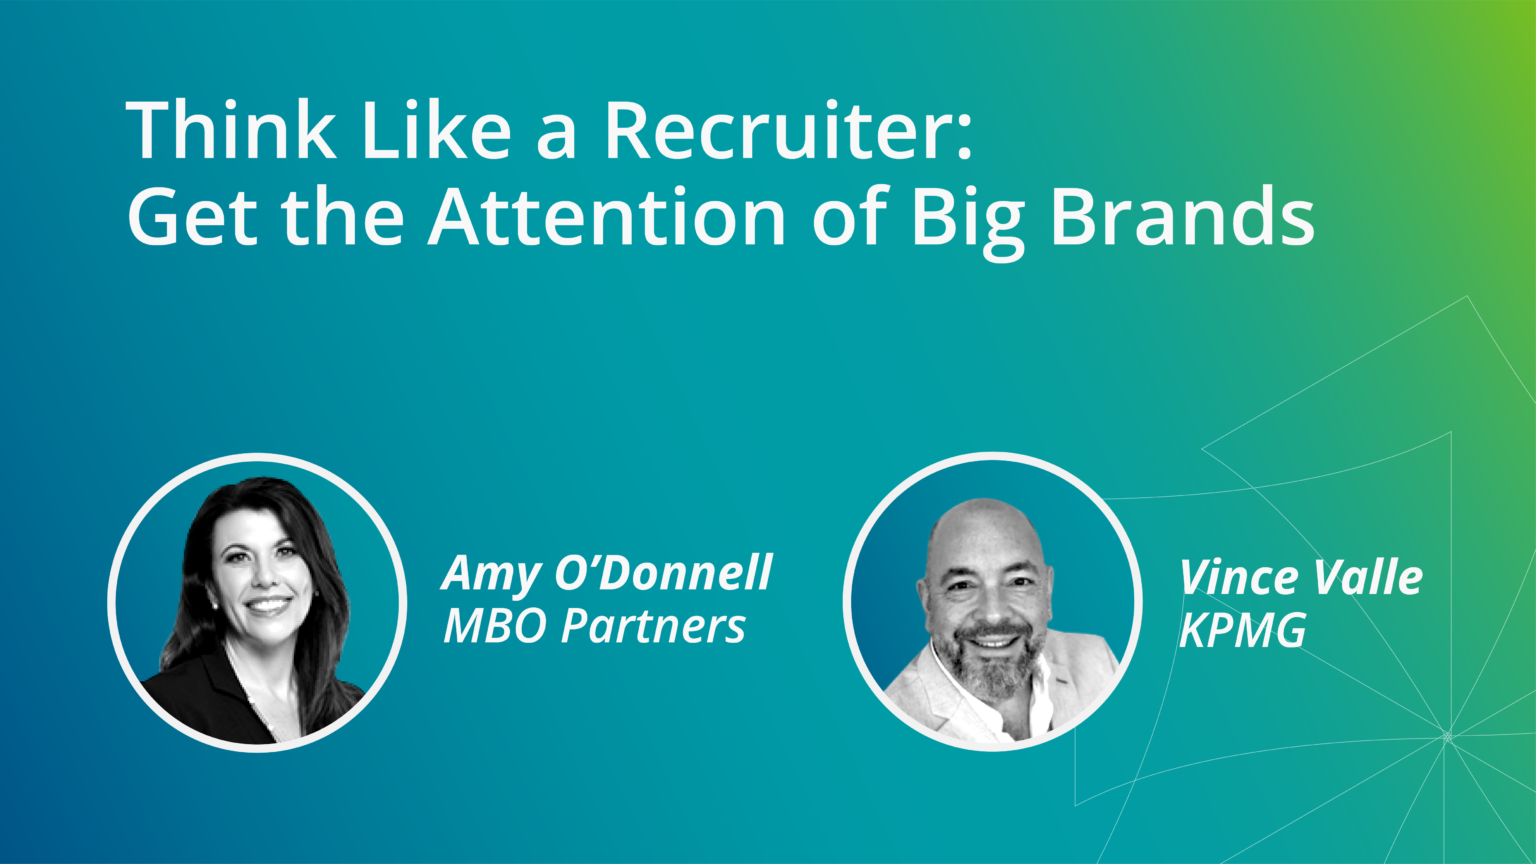 Think-like-a-recruiter-what-you-need-to-know-to-get-the-attention-of-big-brands-summary